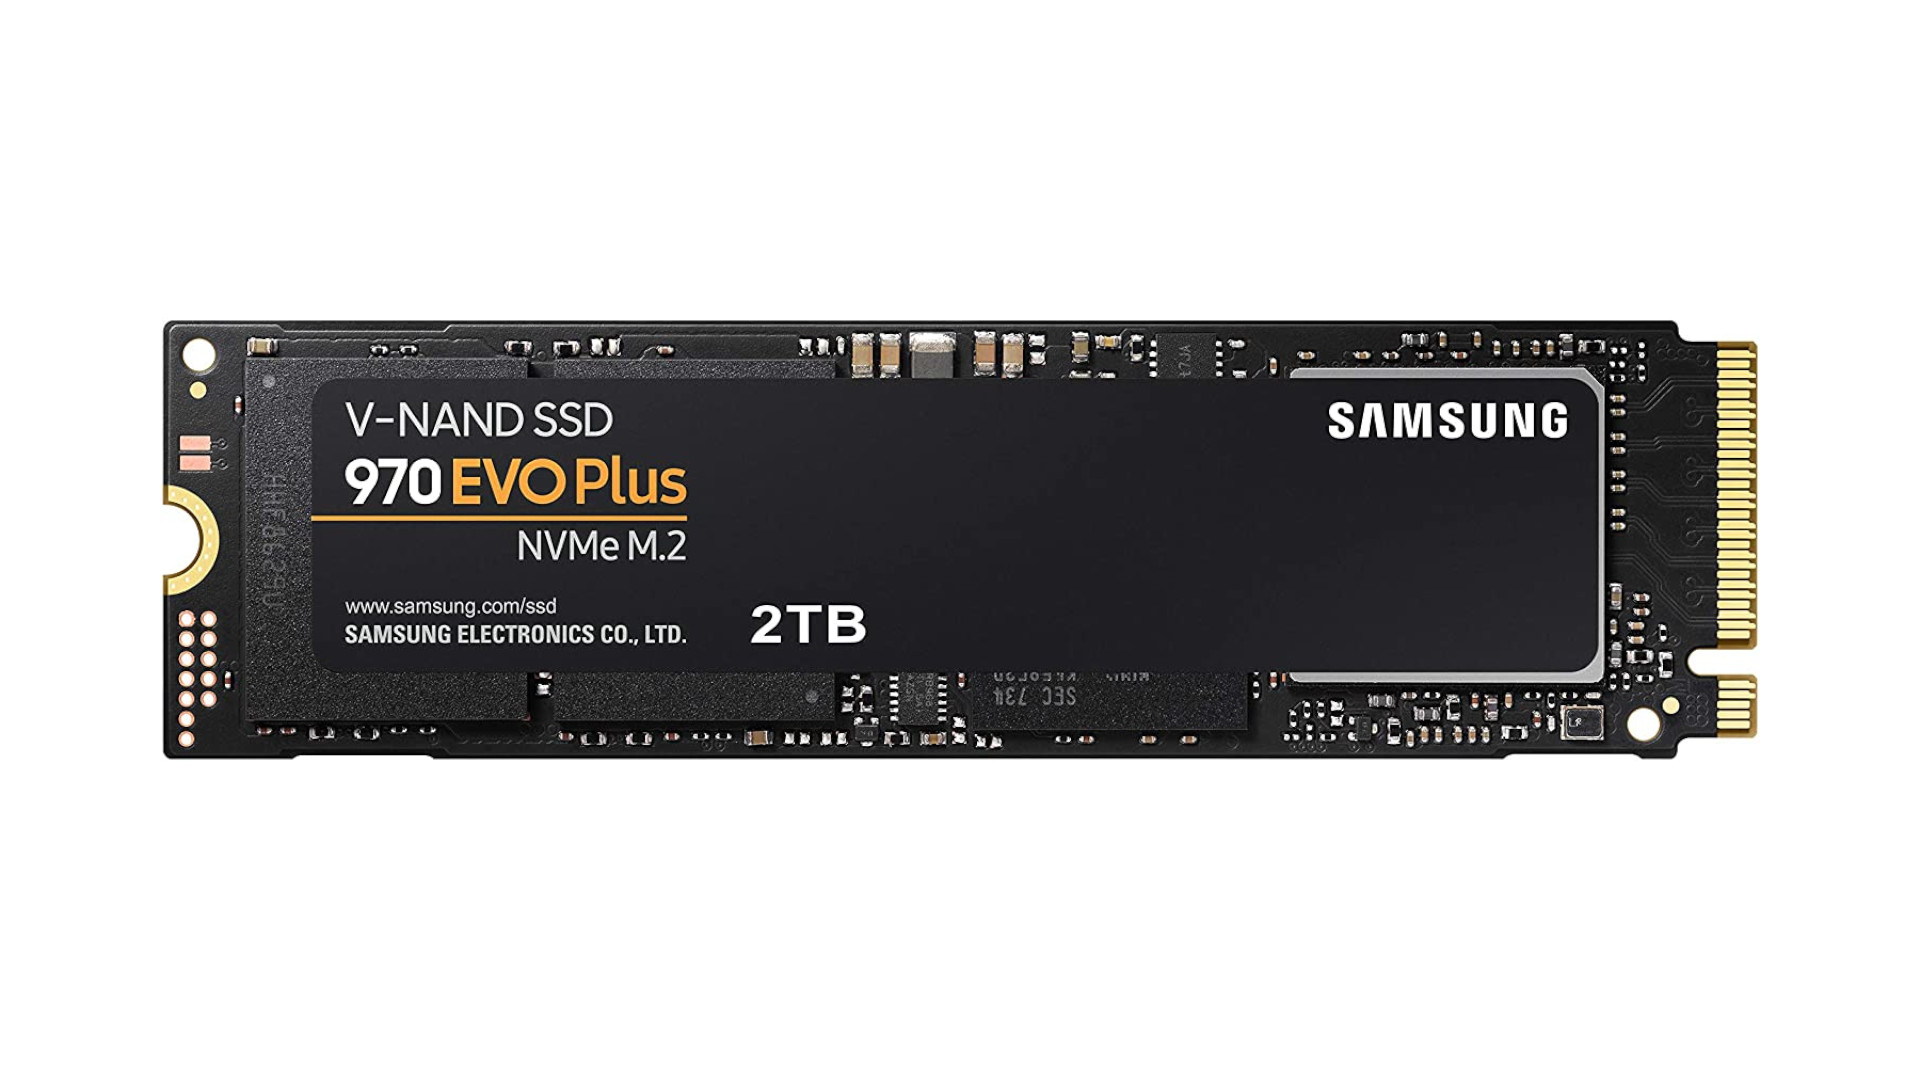  SAMSUNG 970 EVO Plus SSD 2TB - M.2 NVMe Interface Internal Solid State Drive with V-NAND Technology